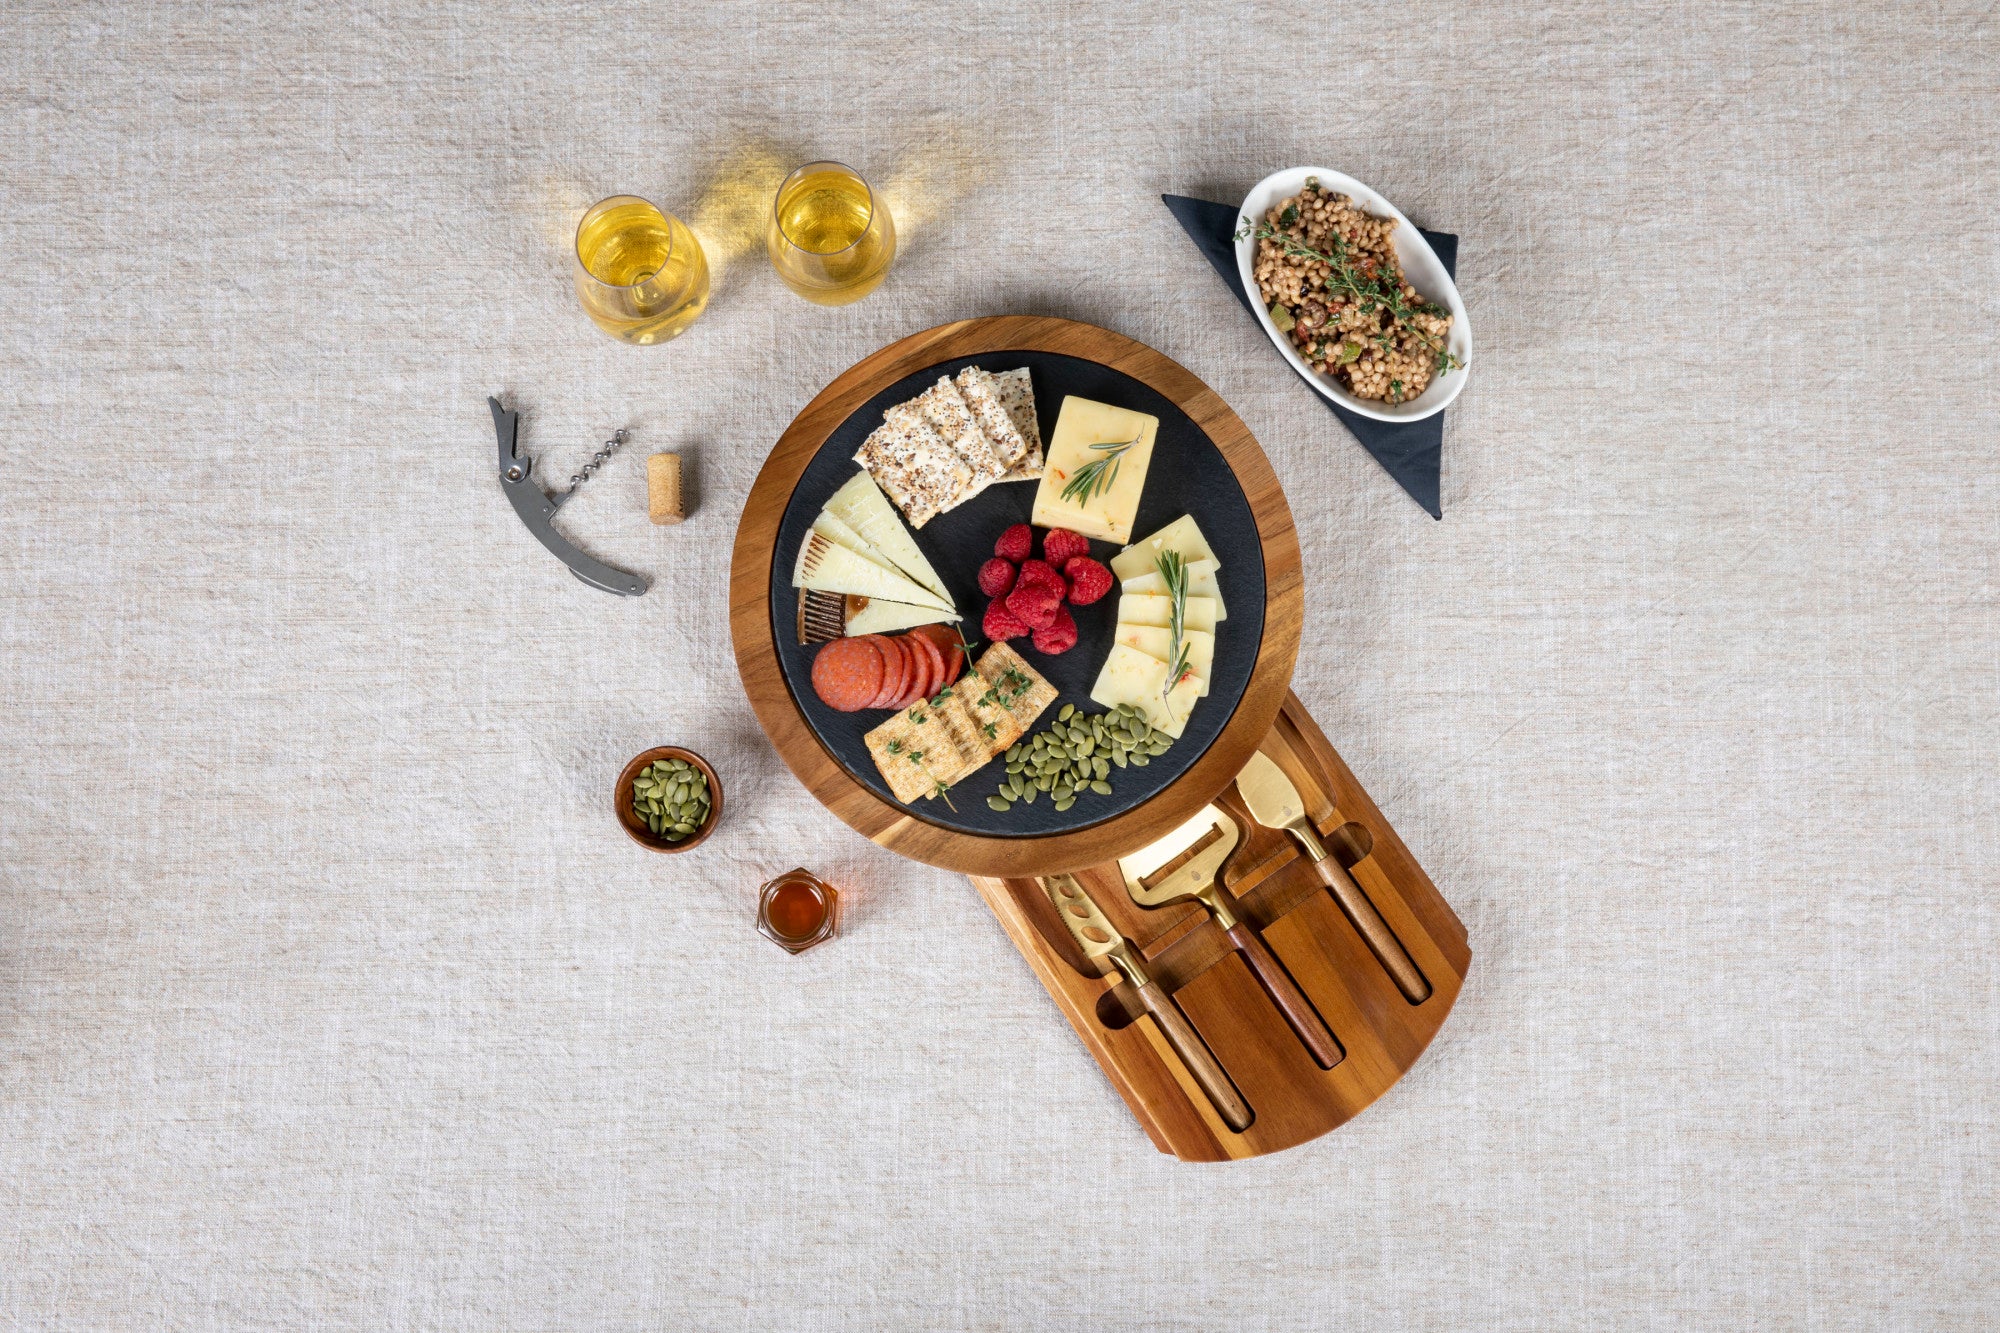 Cal State Fullerton Titans - Insignia Acacia and Slate Serving Board with Cheese Tools